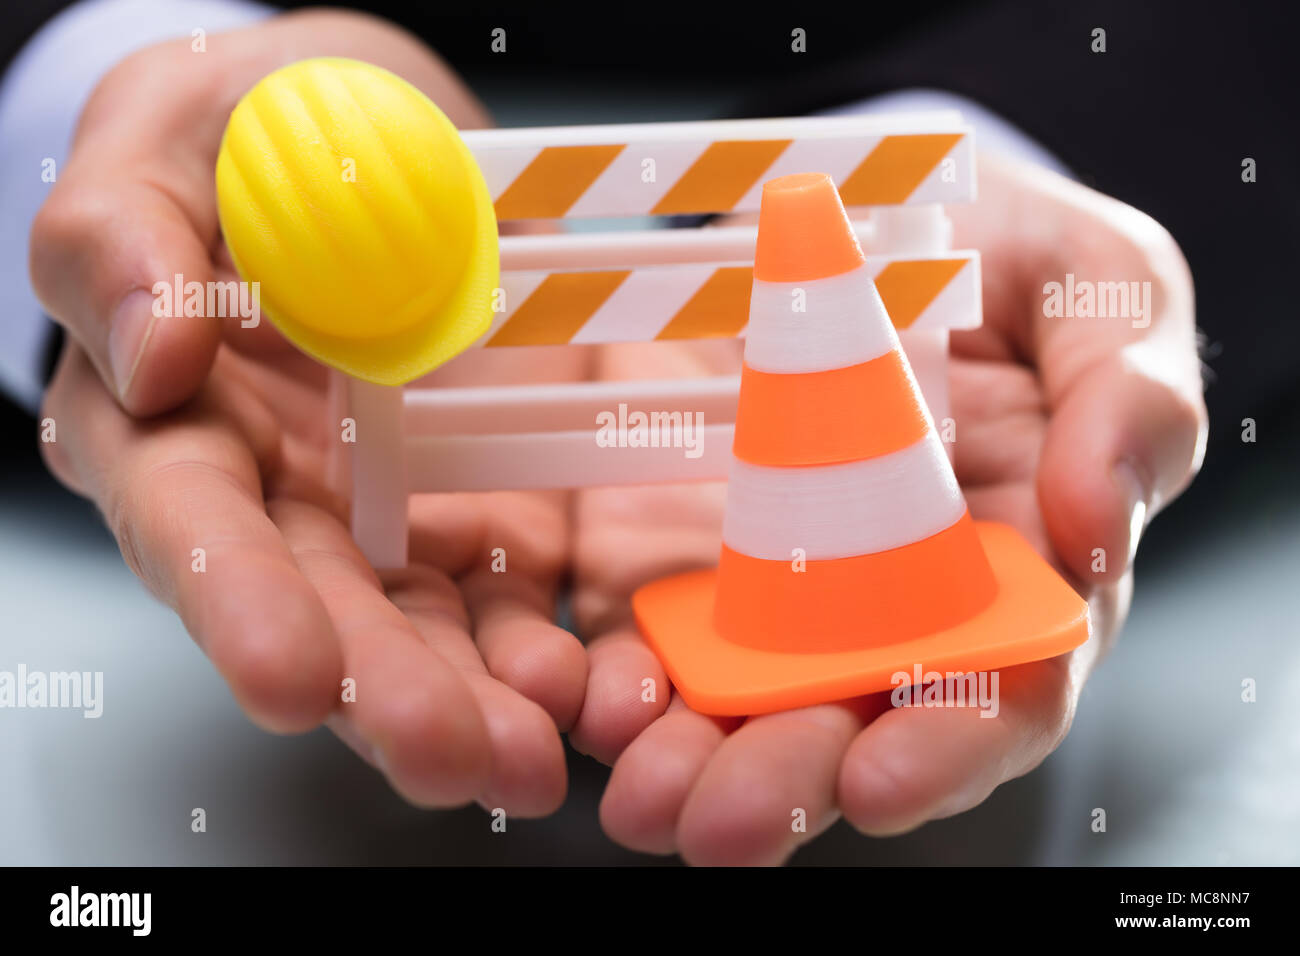 Close-up Of Person's Hand Holding Barricade With Traffic Cone And Hard Hat Stock Photo